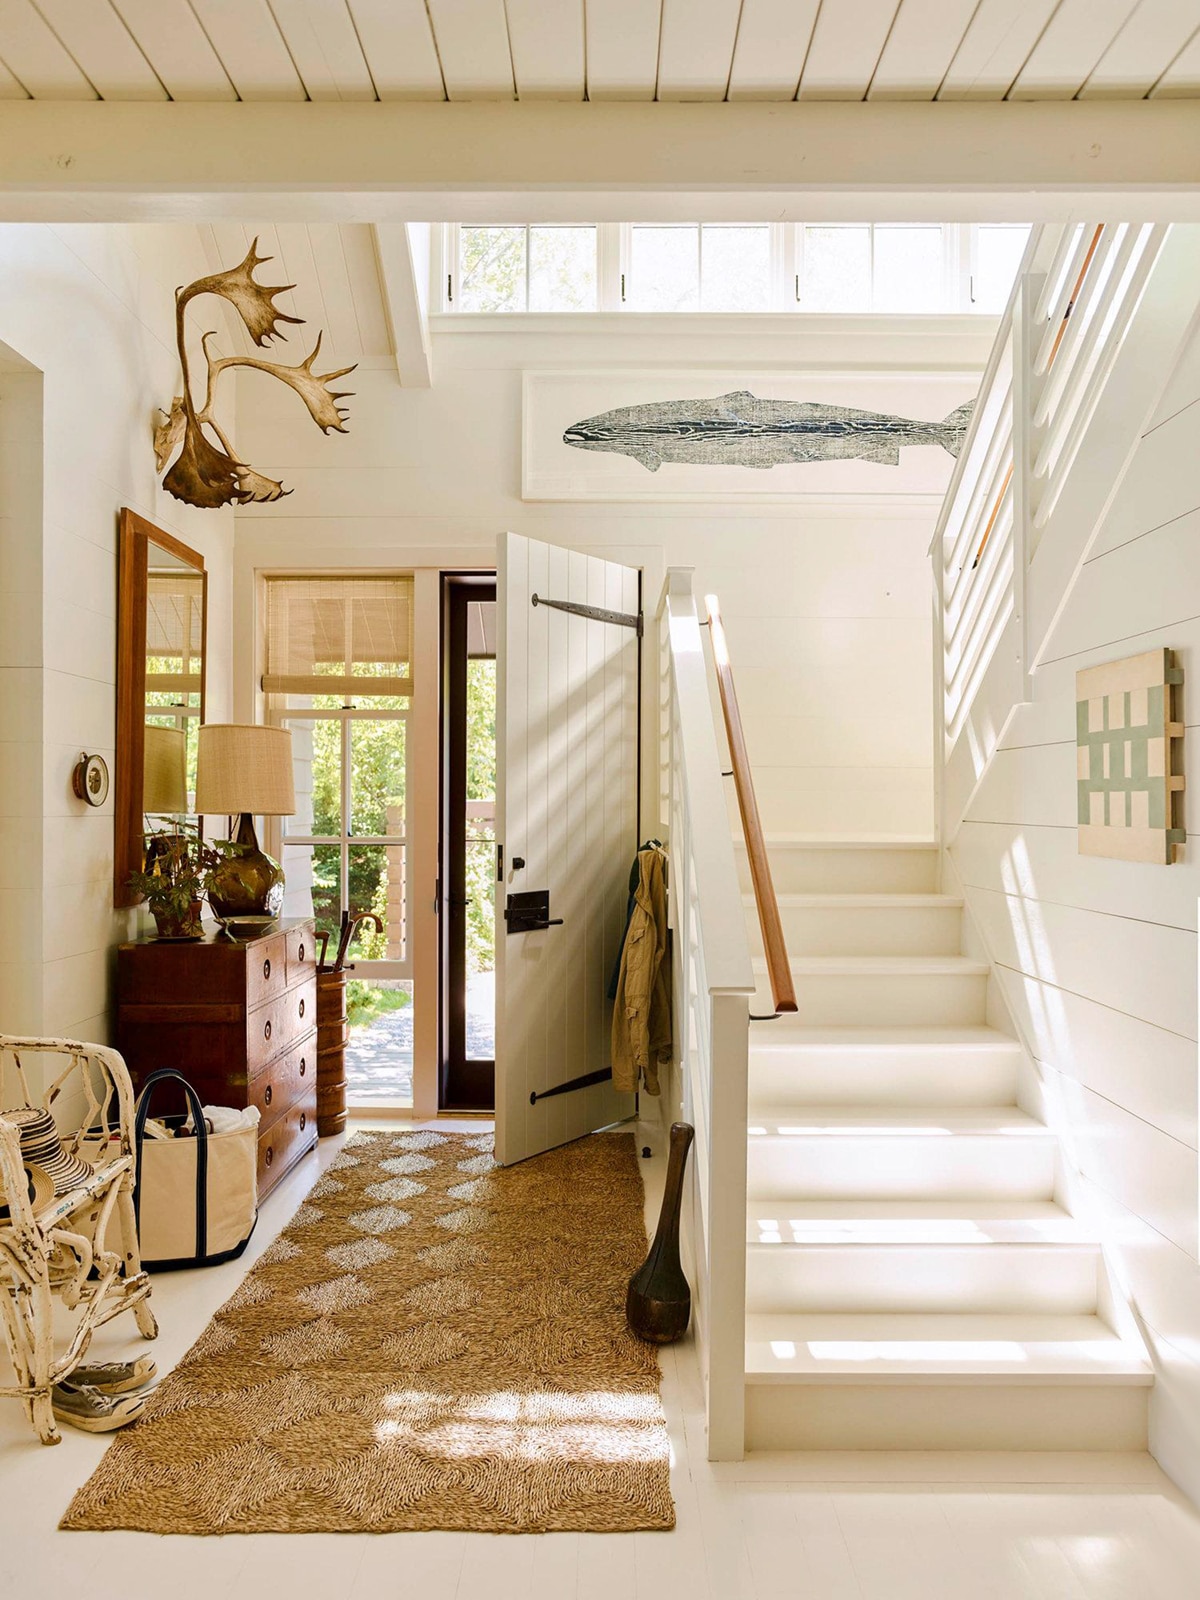 cozy entryway for a seaside cottage in maine | house tour on coco kelley